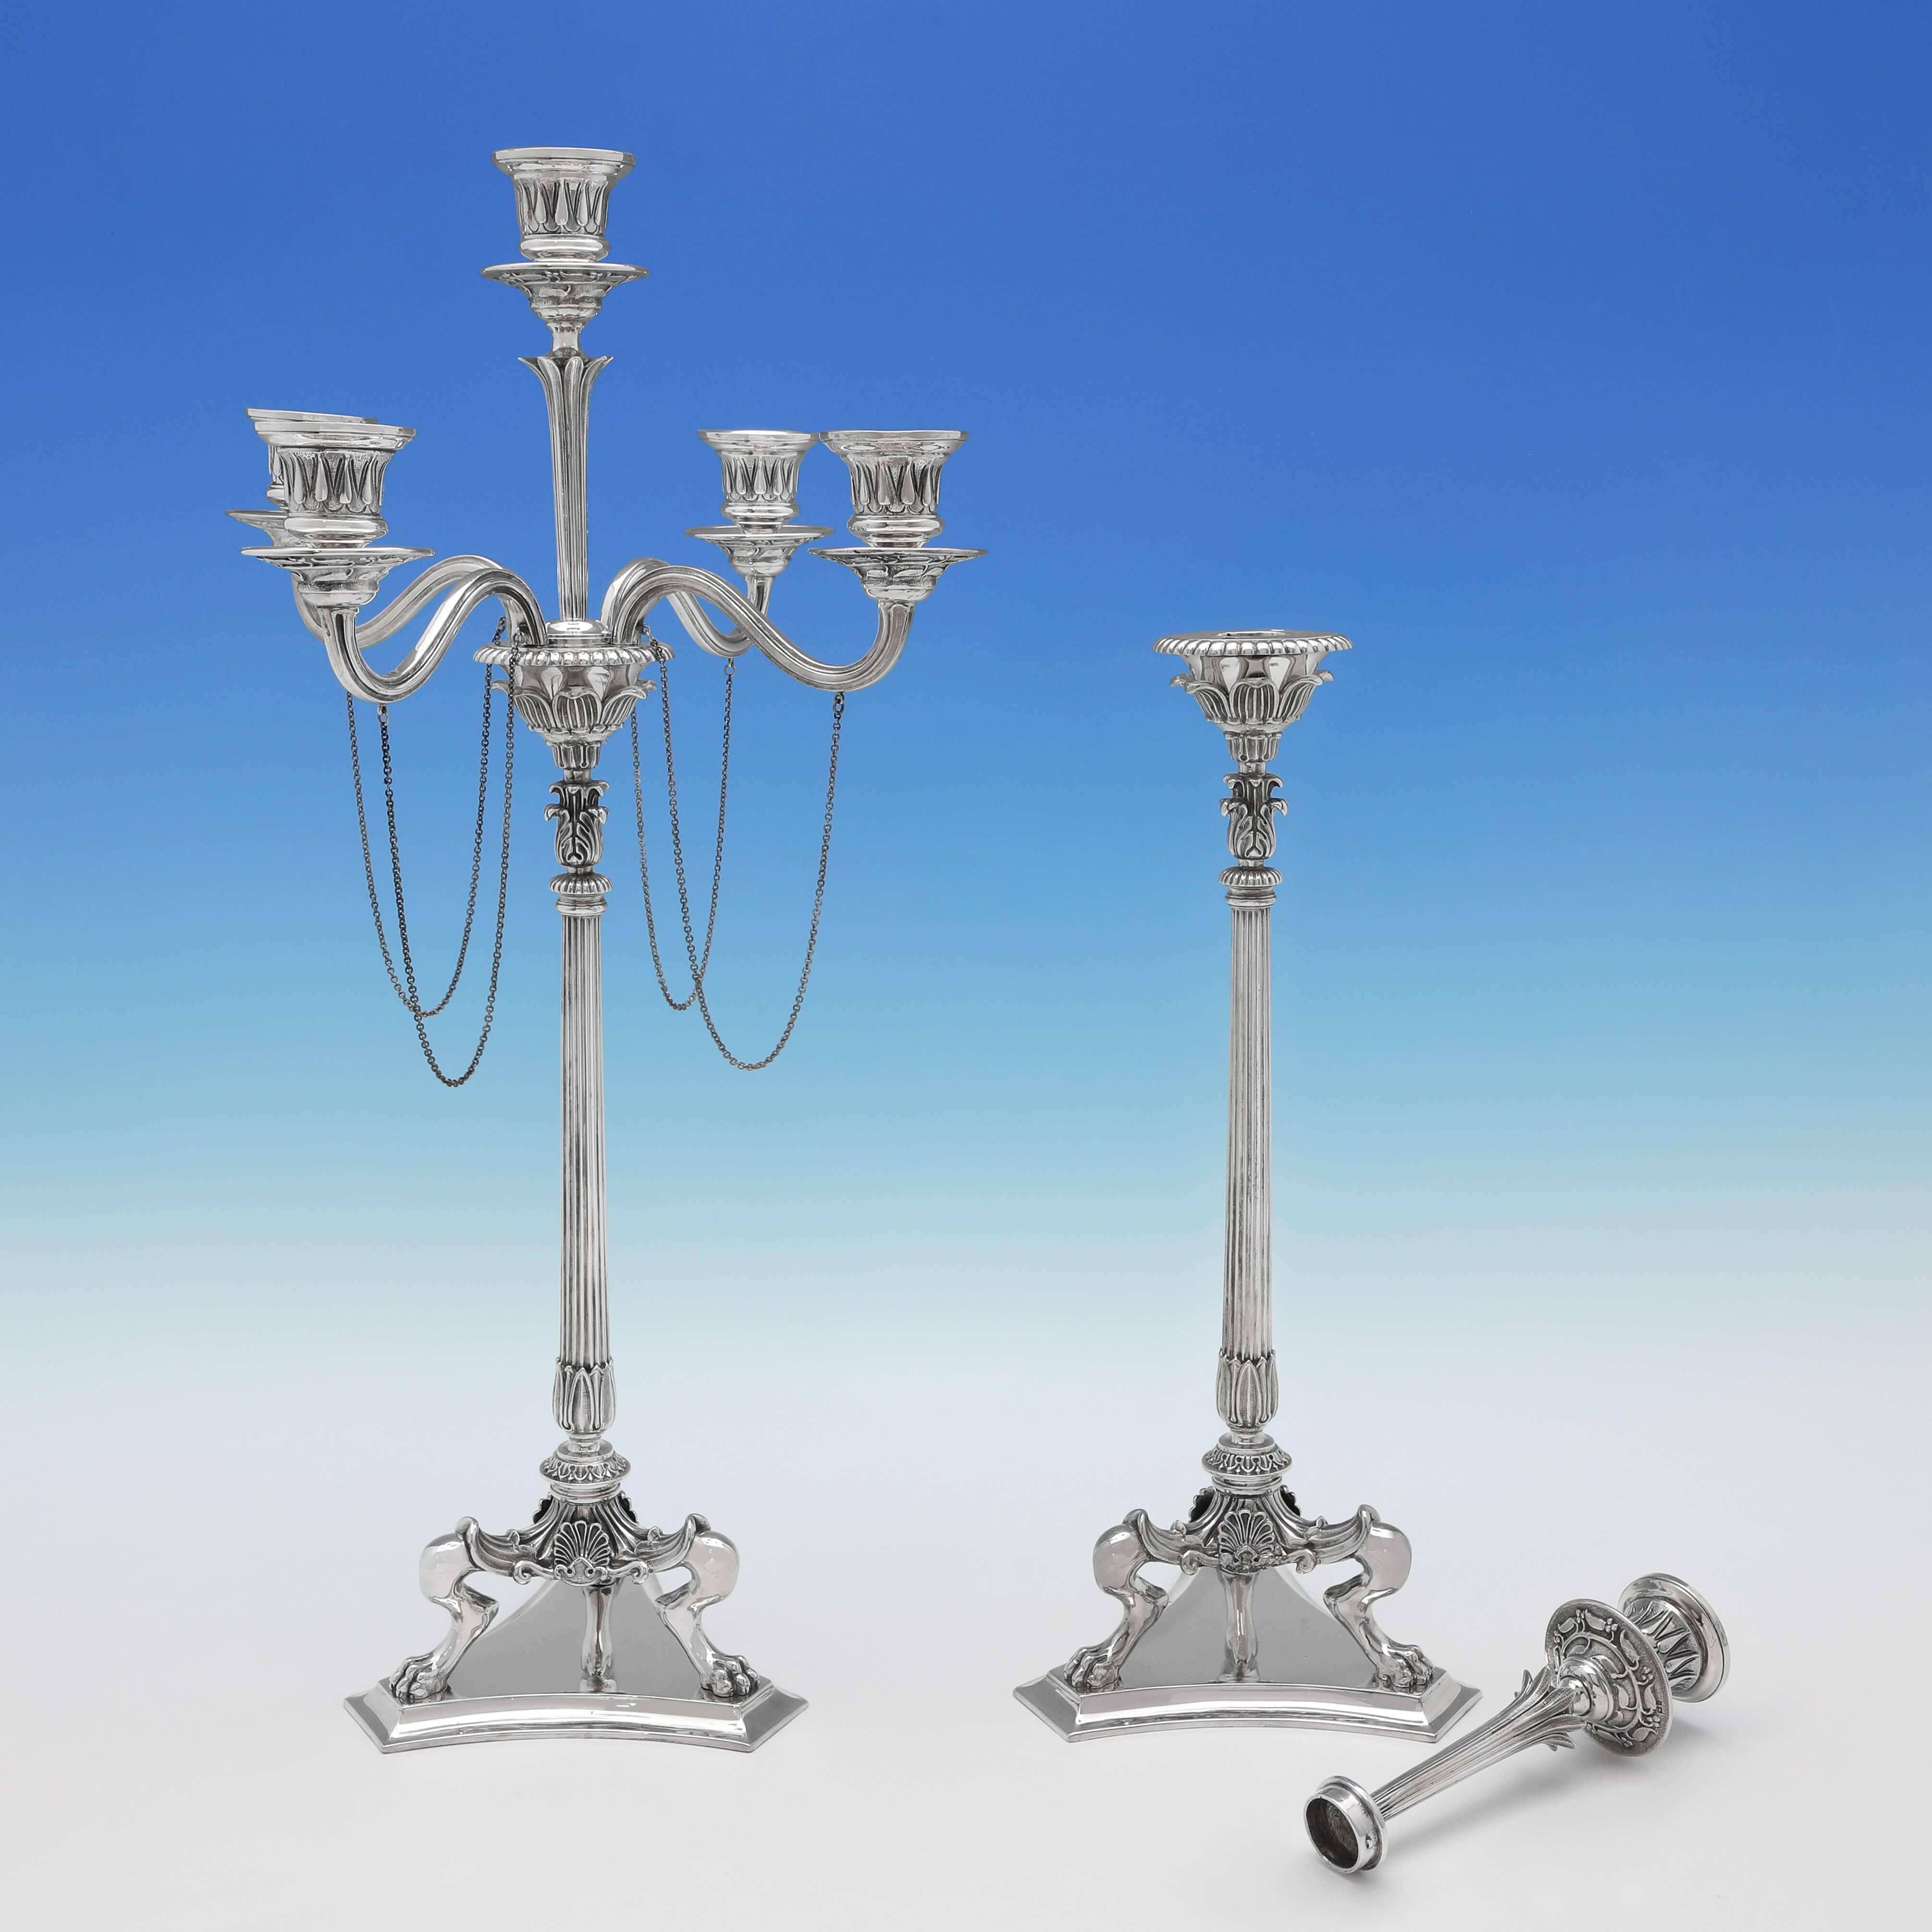 Neoclassical Revival Elkington Neoclassical Candelabra & Centrepiece, Sterling Silver, from 1867 For Sale